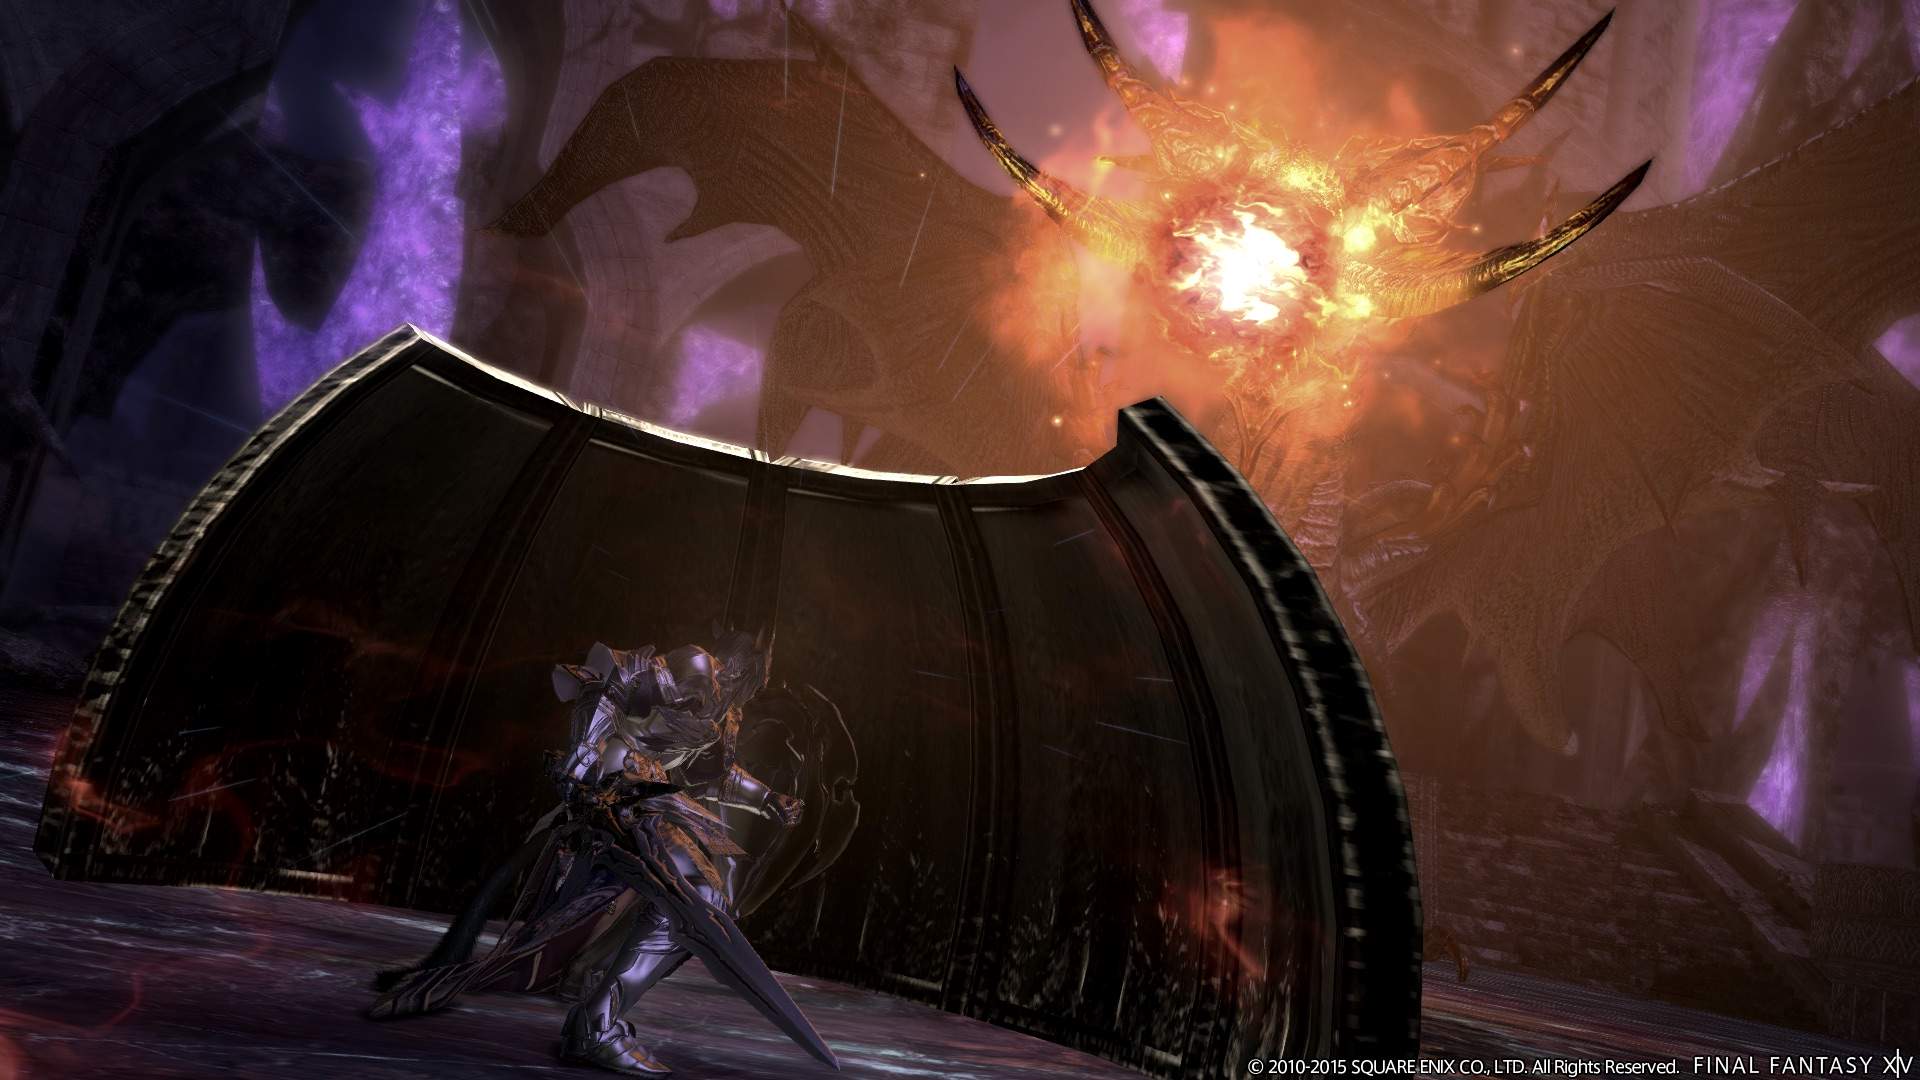 Final Fantasy Xiv Online Has Been Reborn For New And Returning Players Square Enix